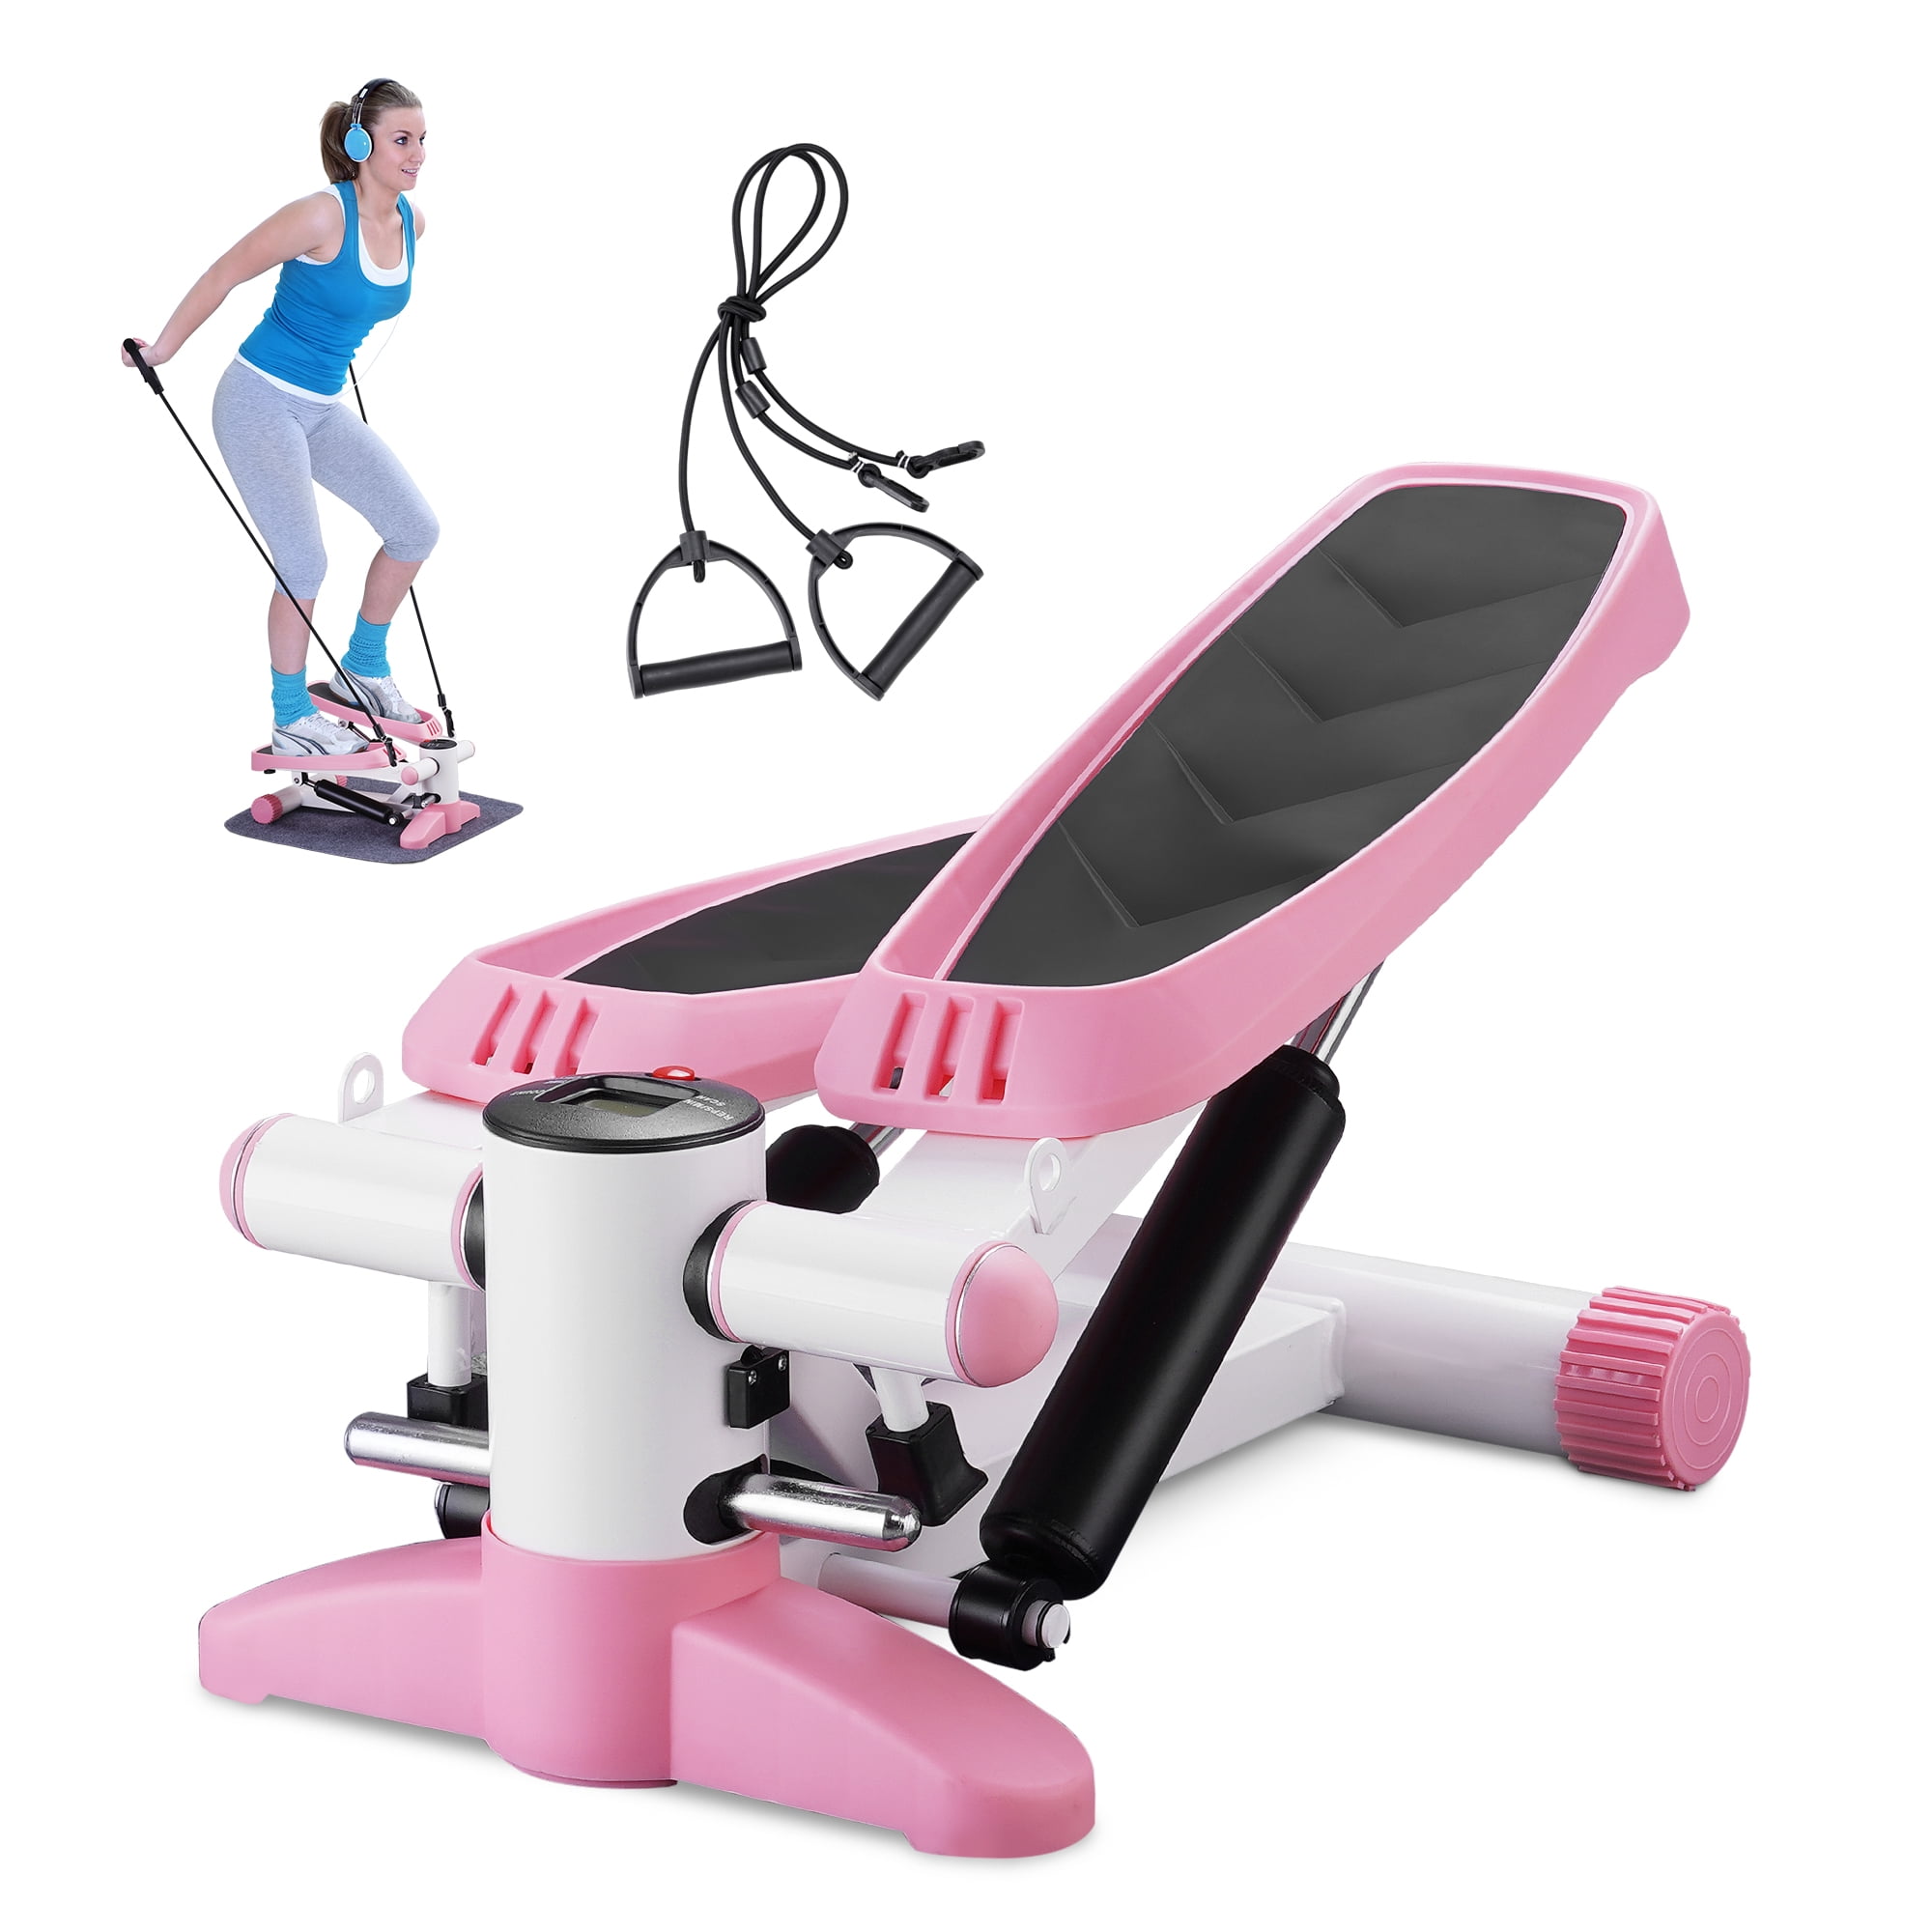 Steppers for Exercise, Stair Stepper with Resistance Bands, Mini Stepper  Health & Fitness Stepper with LCD Monitor White